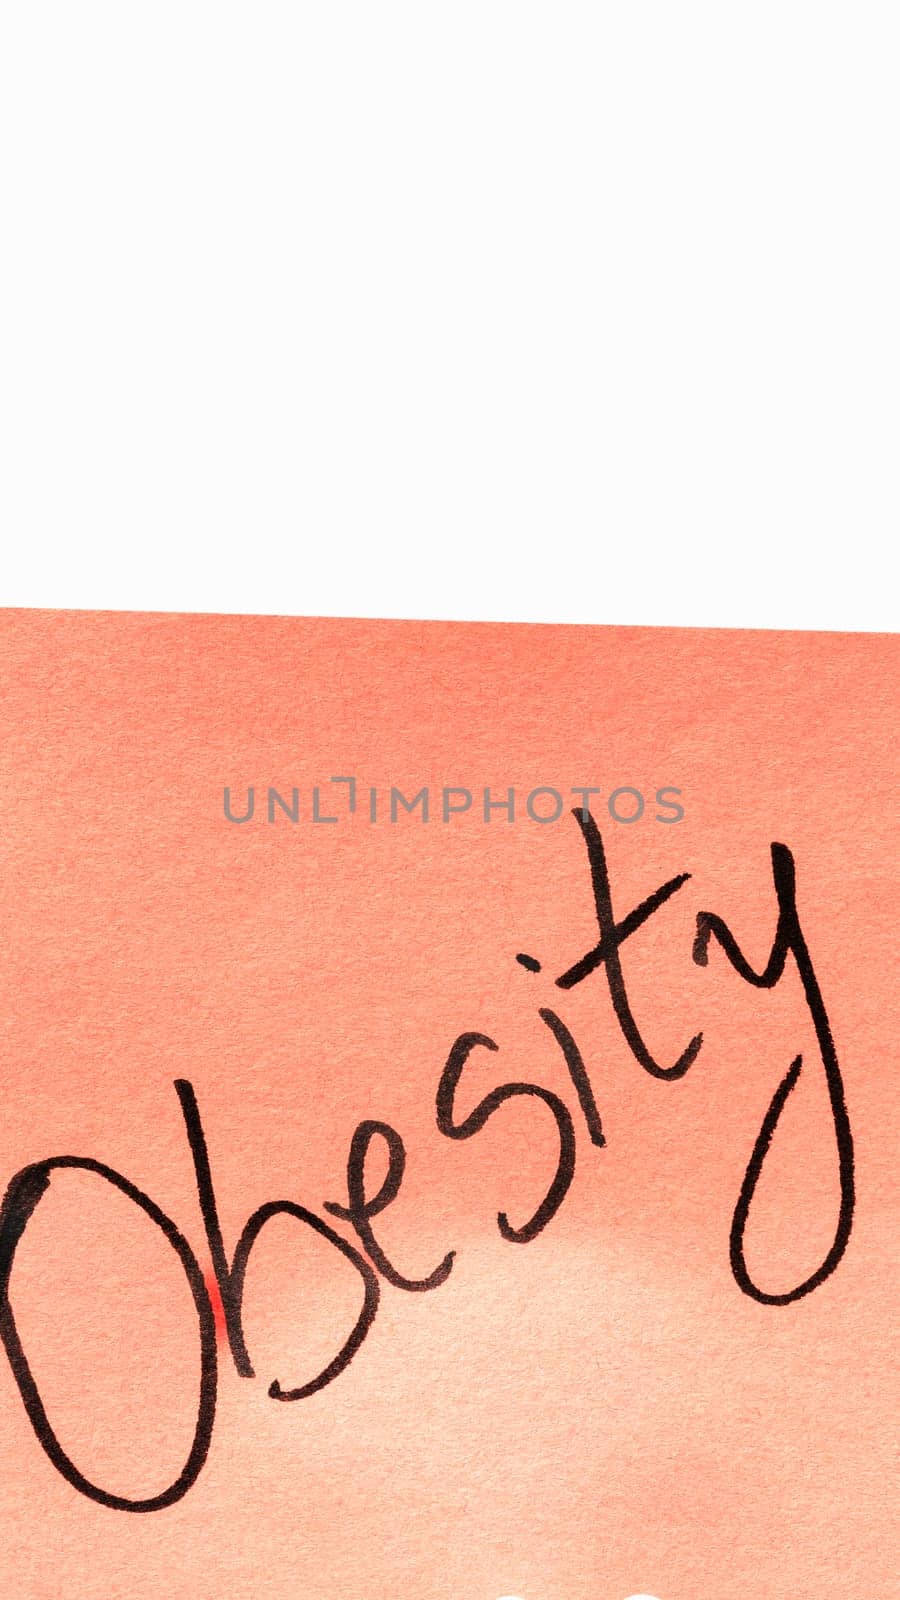 Obesity handwriting text close up isolated on orange paper with copy space. Writing text on memo post reminder by vladispas